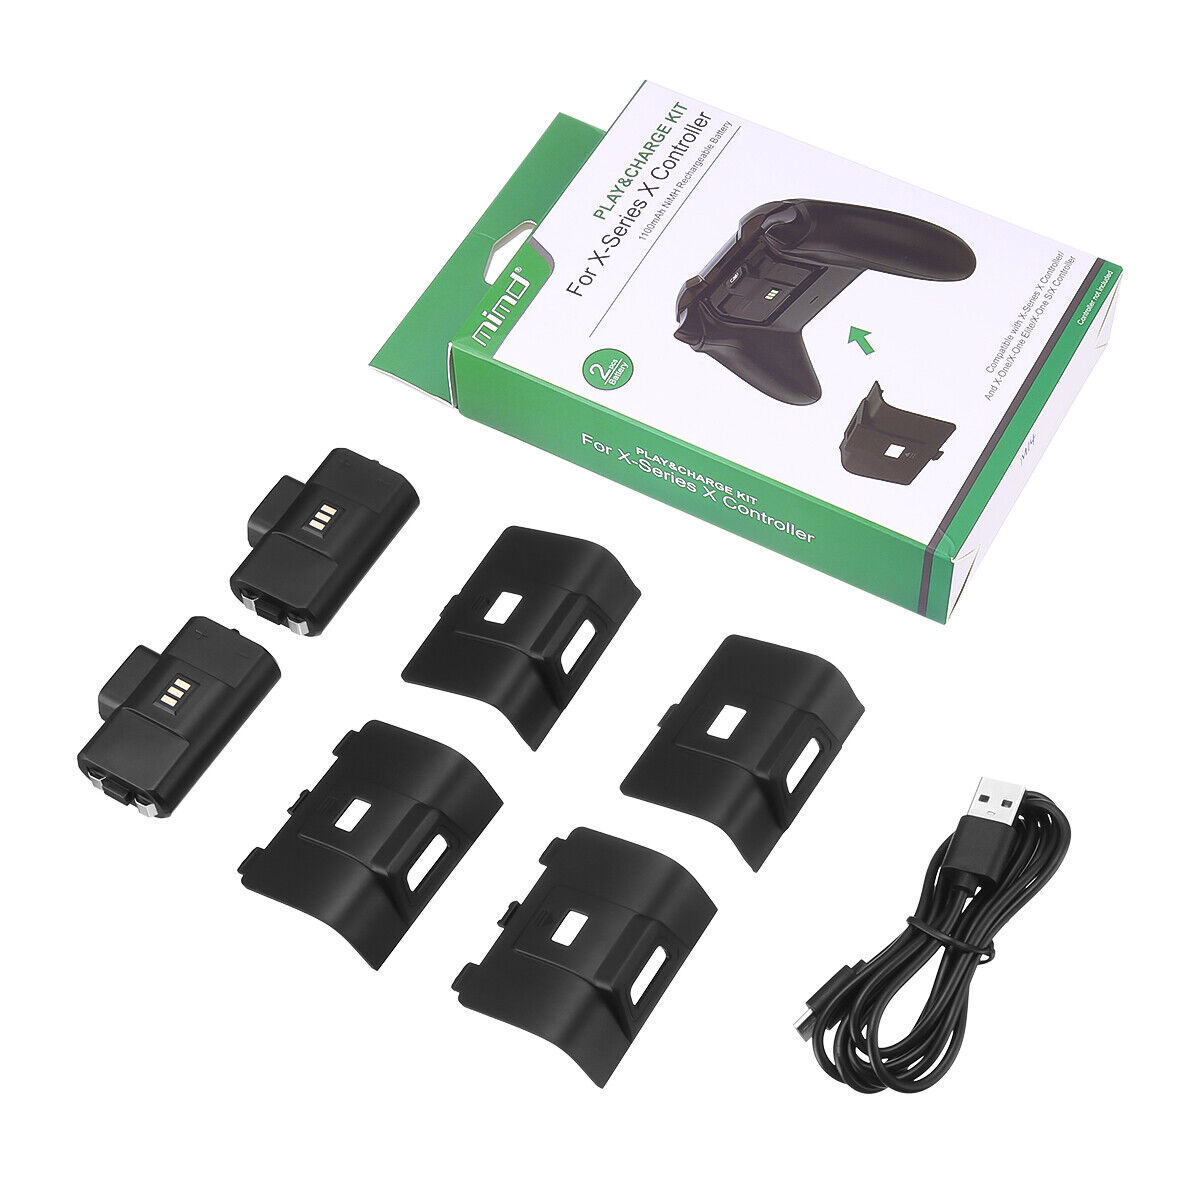 Rechargeable Battery Pack For XBox One X/S Series X/S Controller & Charger Cable EBL Does not apply - фотография #9